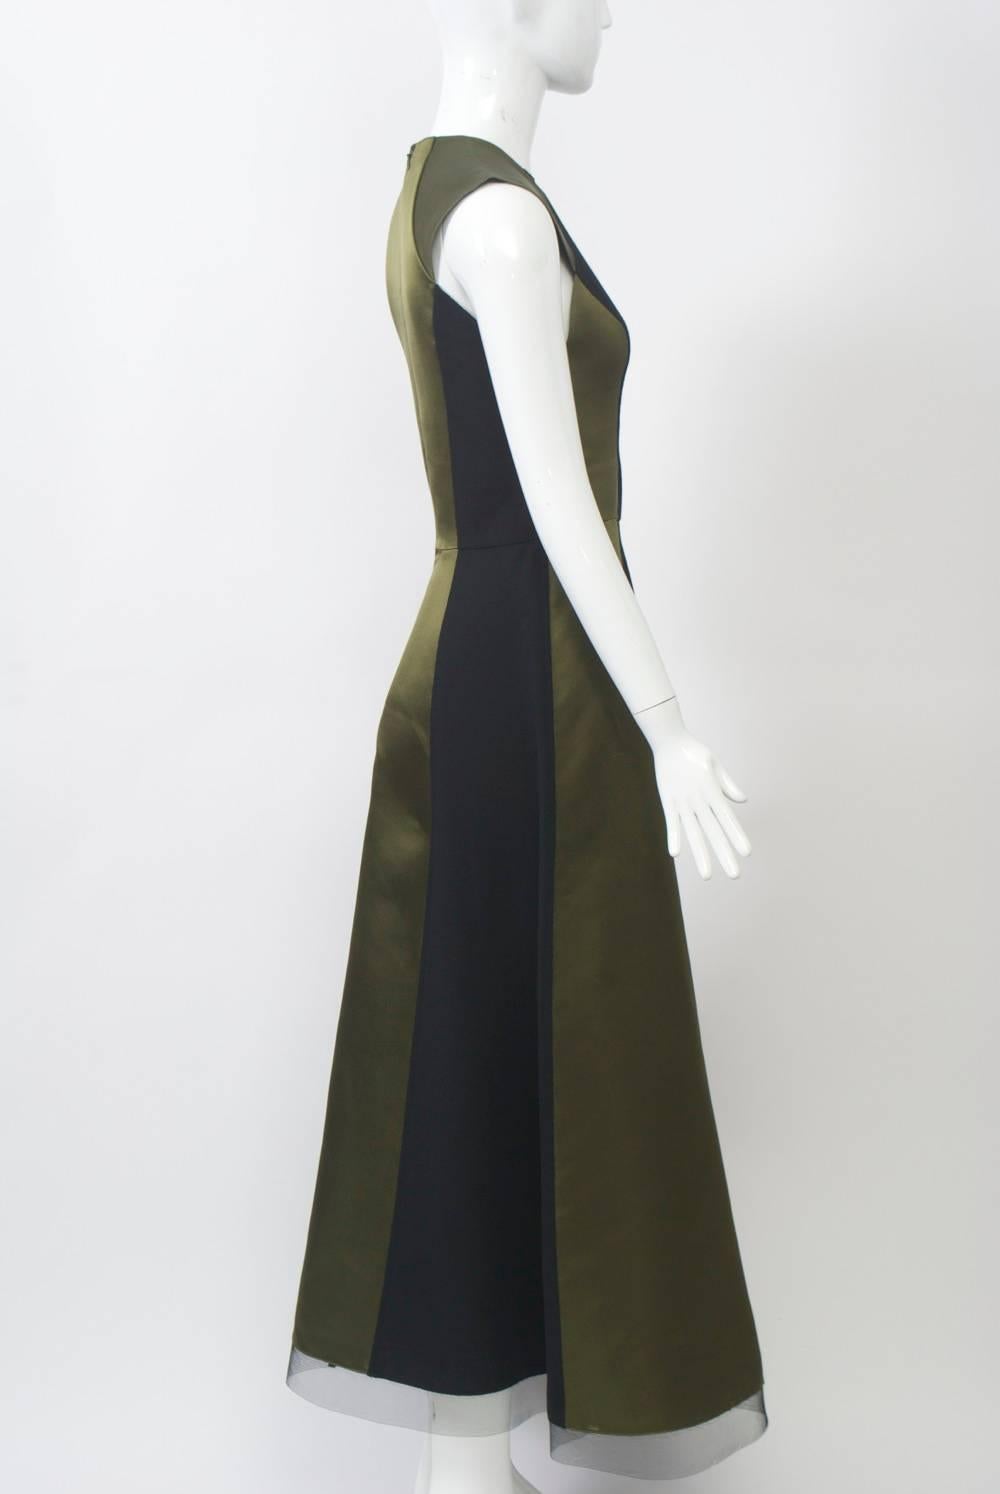 Geoffrey Beene Olive/Black Gown with Stole In Good Condition For Sale In Alford, MA